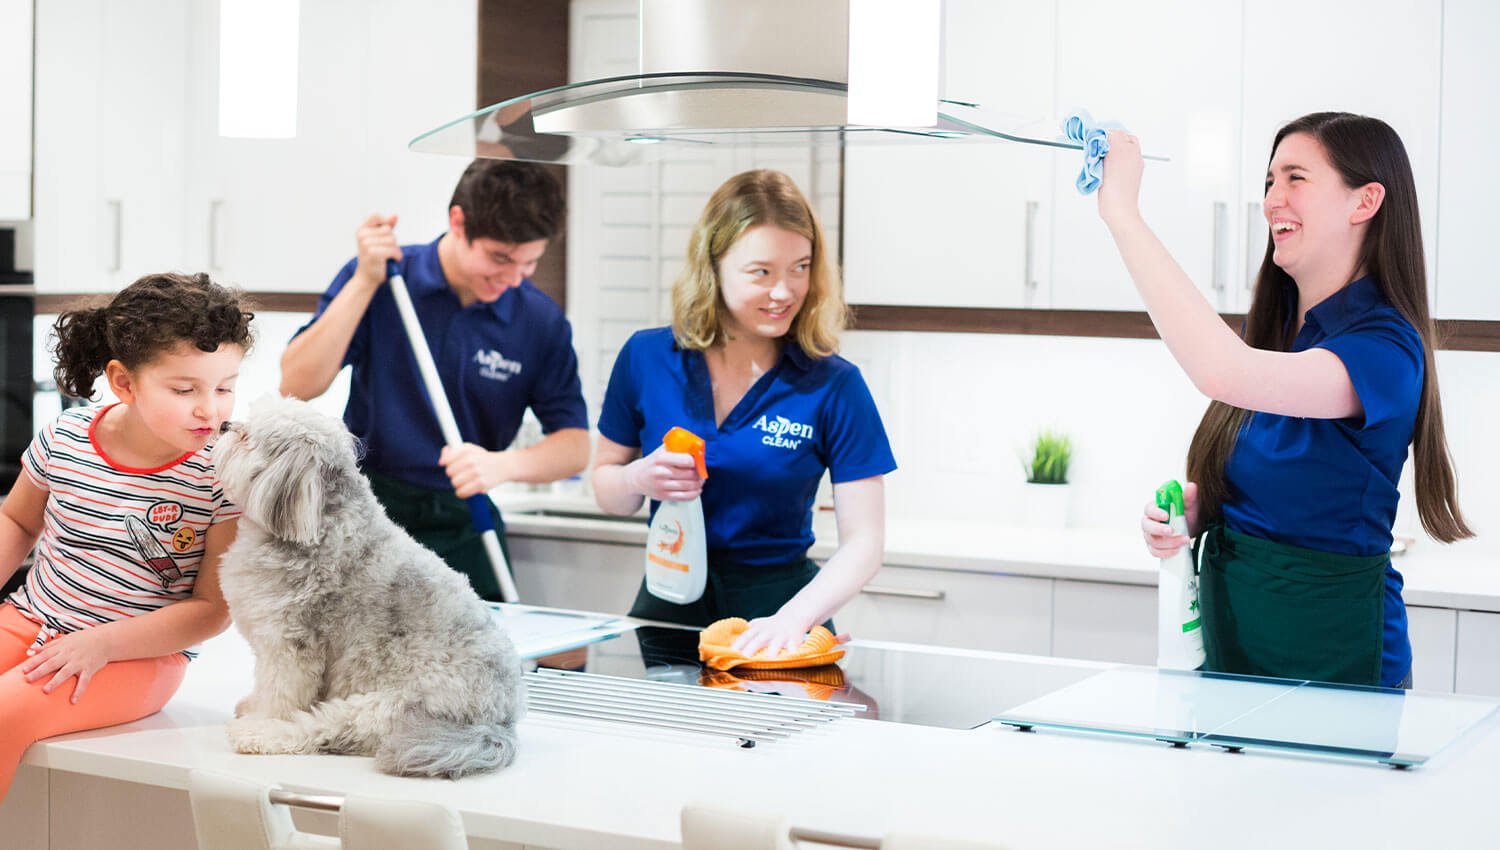 Residential Cleaning Edmonton